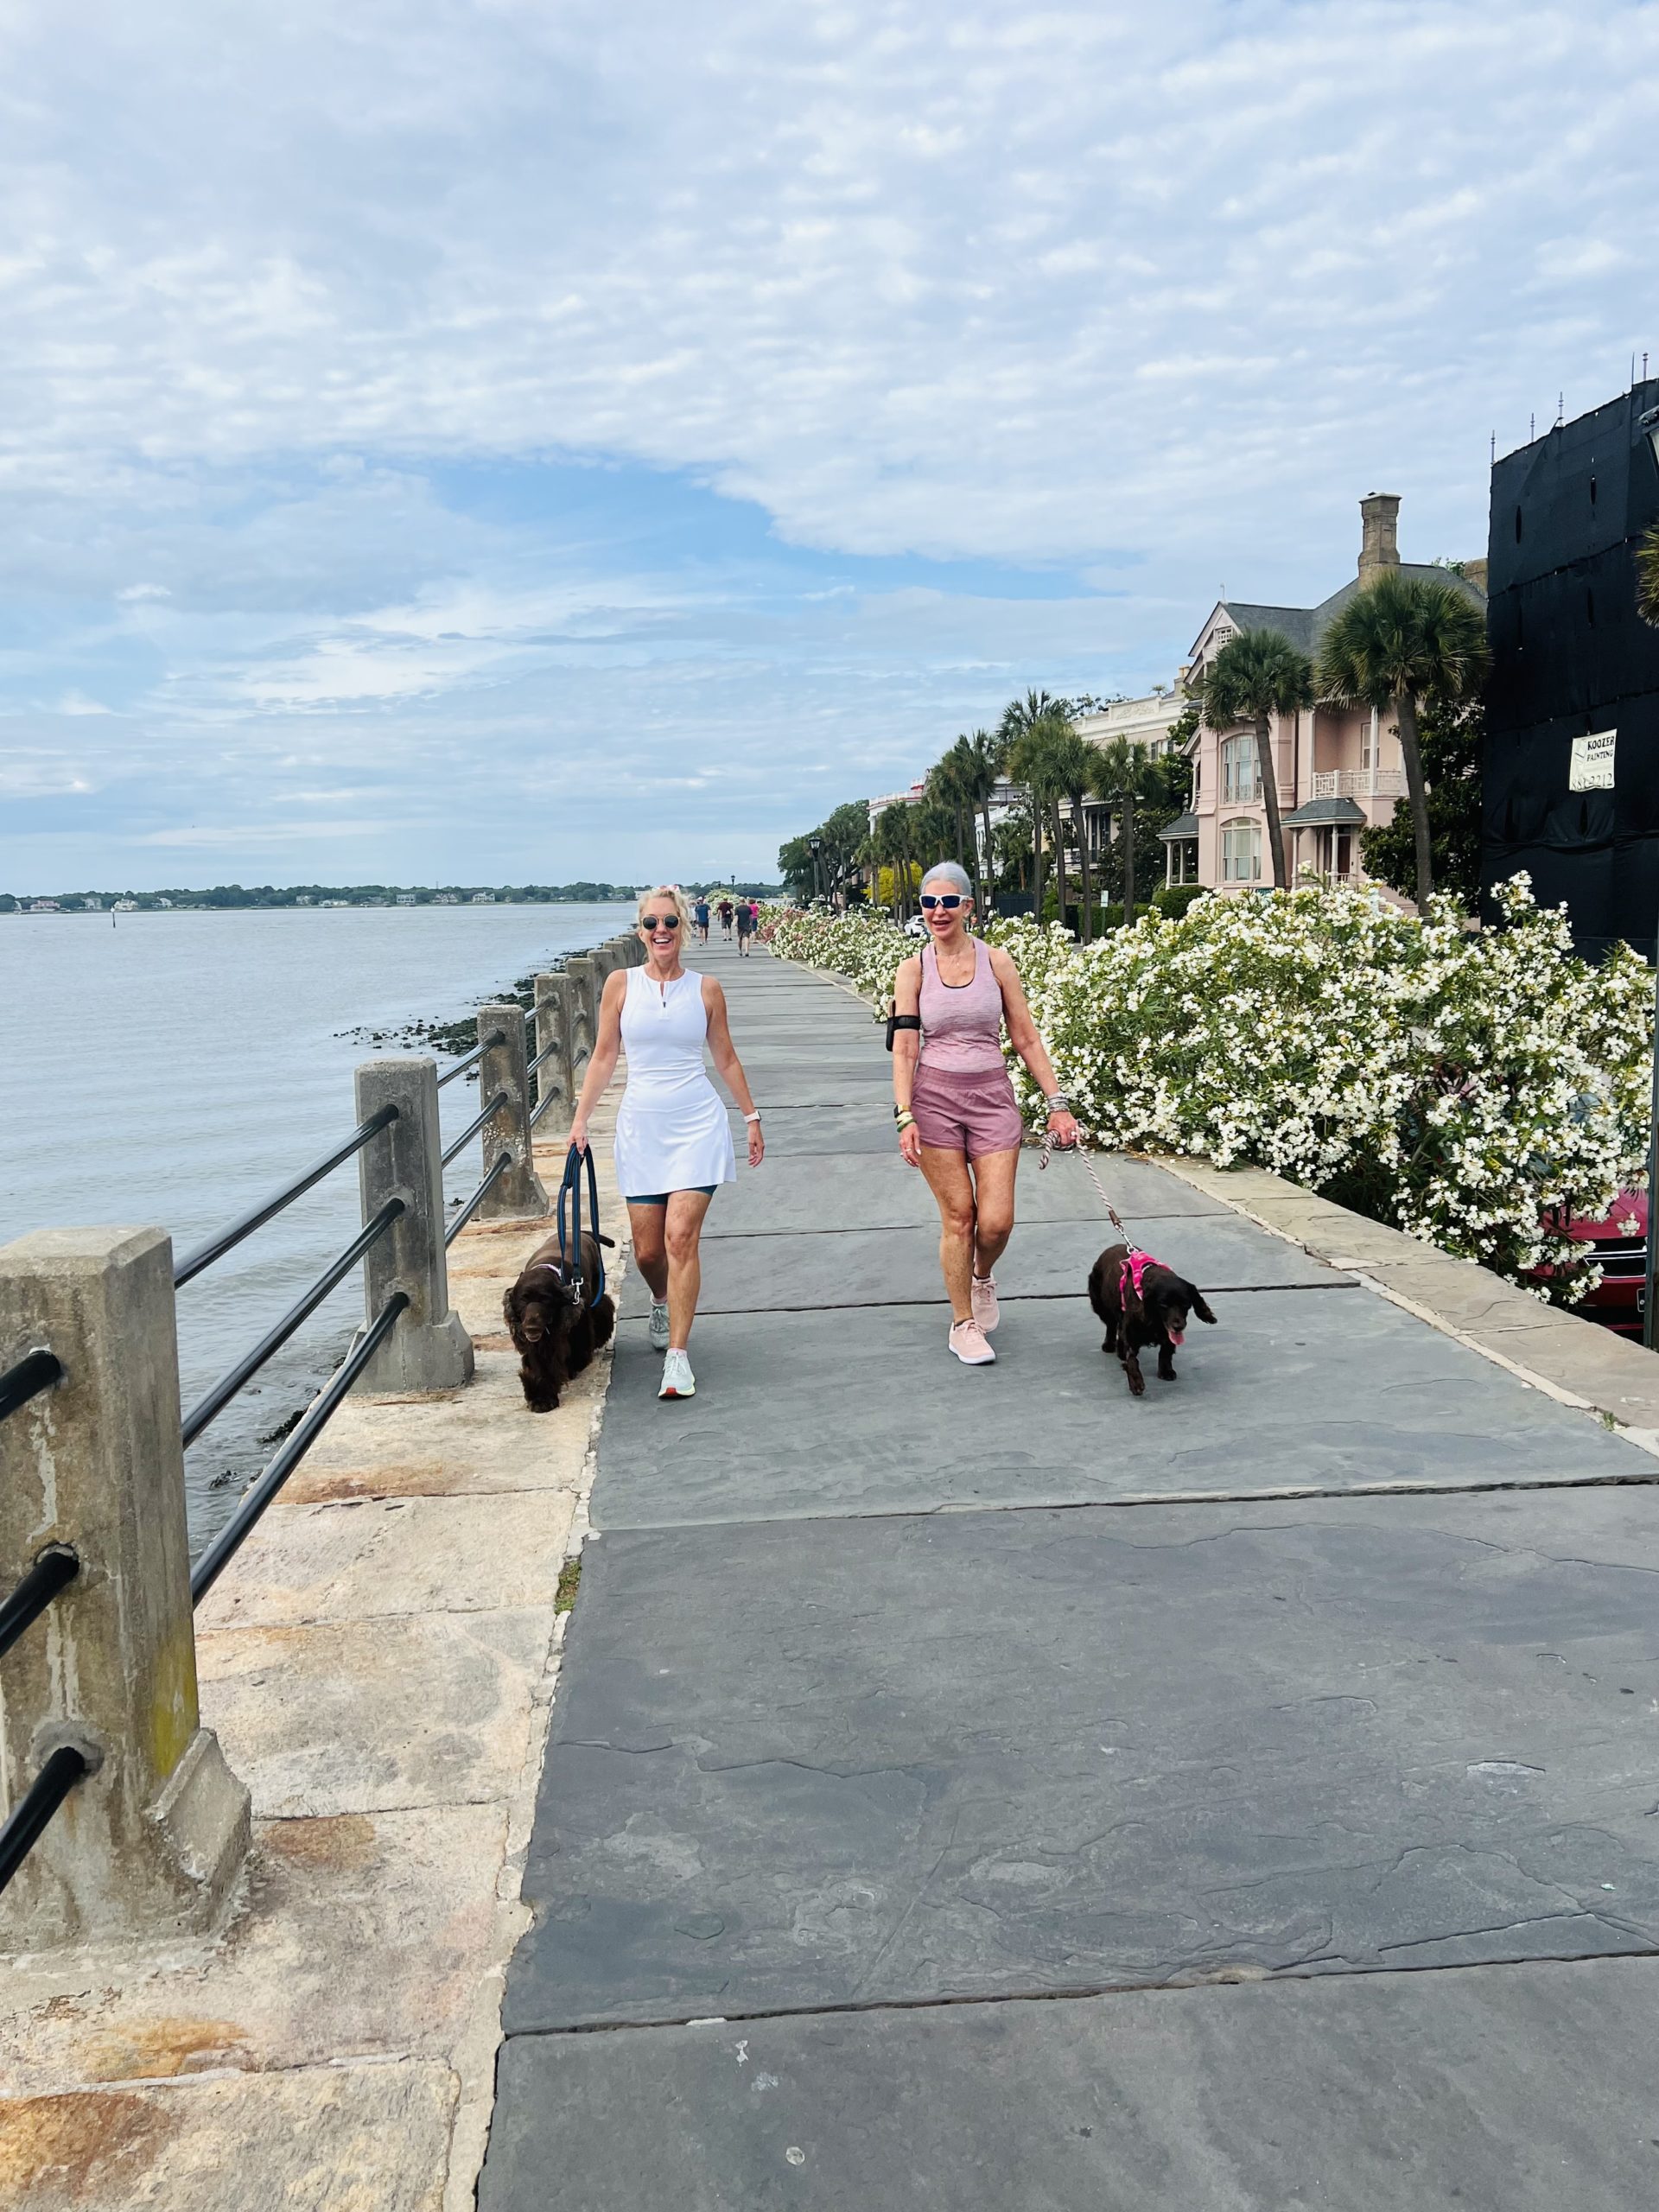 ladies walking through the streets of charleston with dog